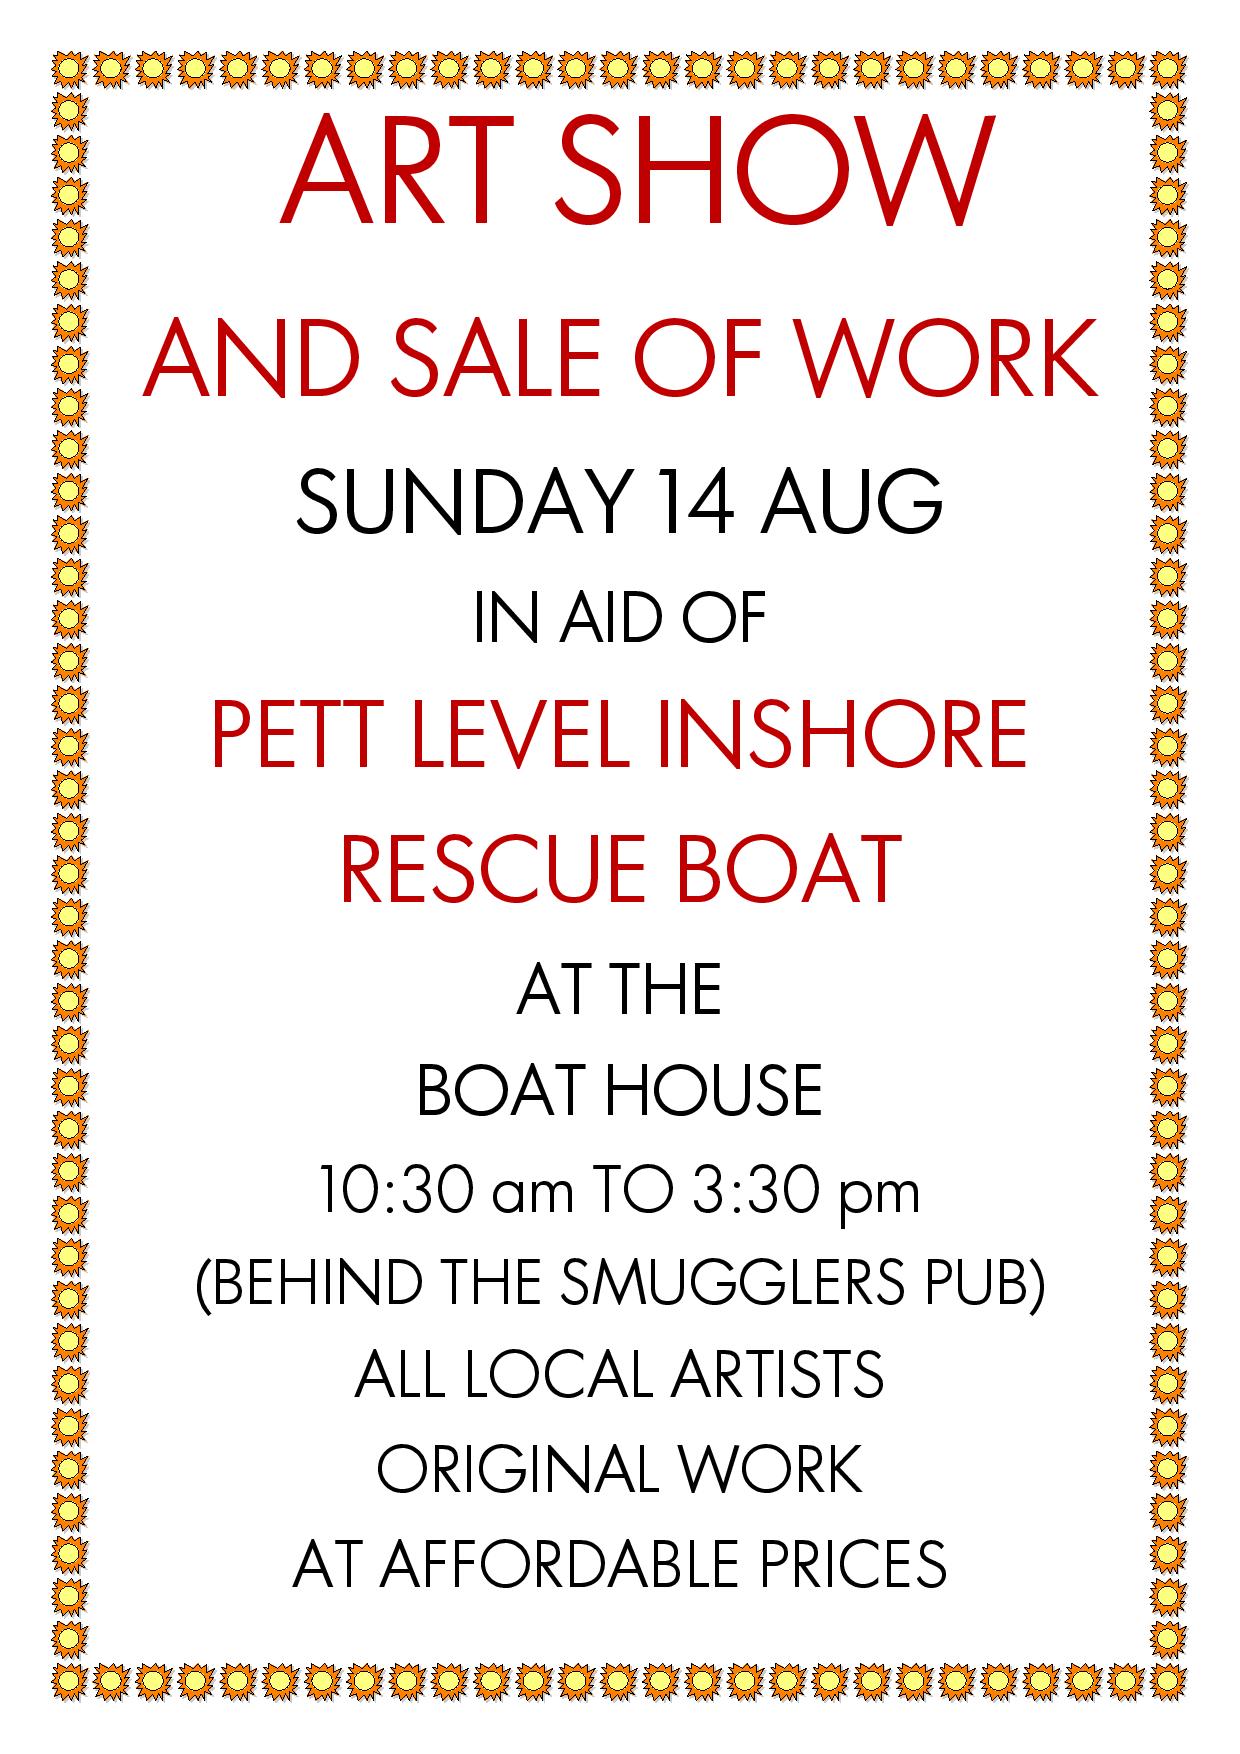 14th August 2022 10.30 to 3.30 at PETT LEVEL INDEPENDENT LIFE BOAT ART SHOW AND SALE